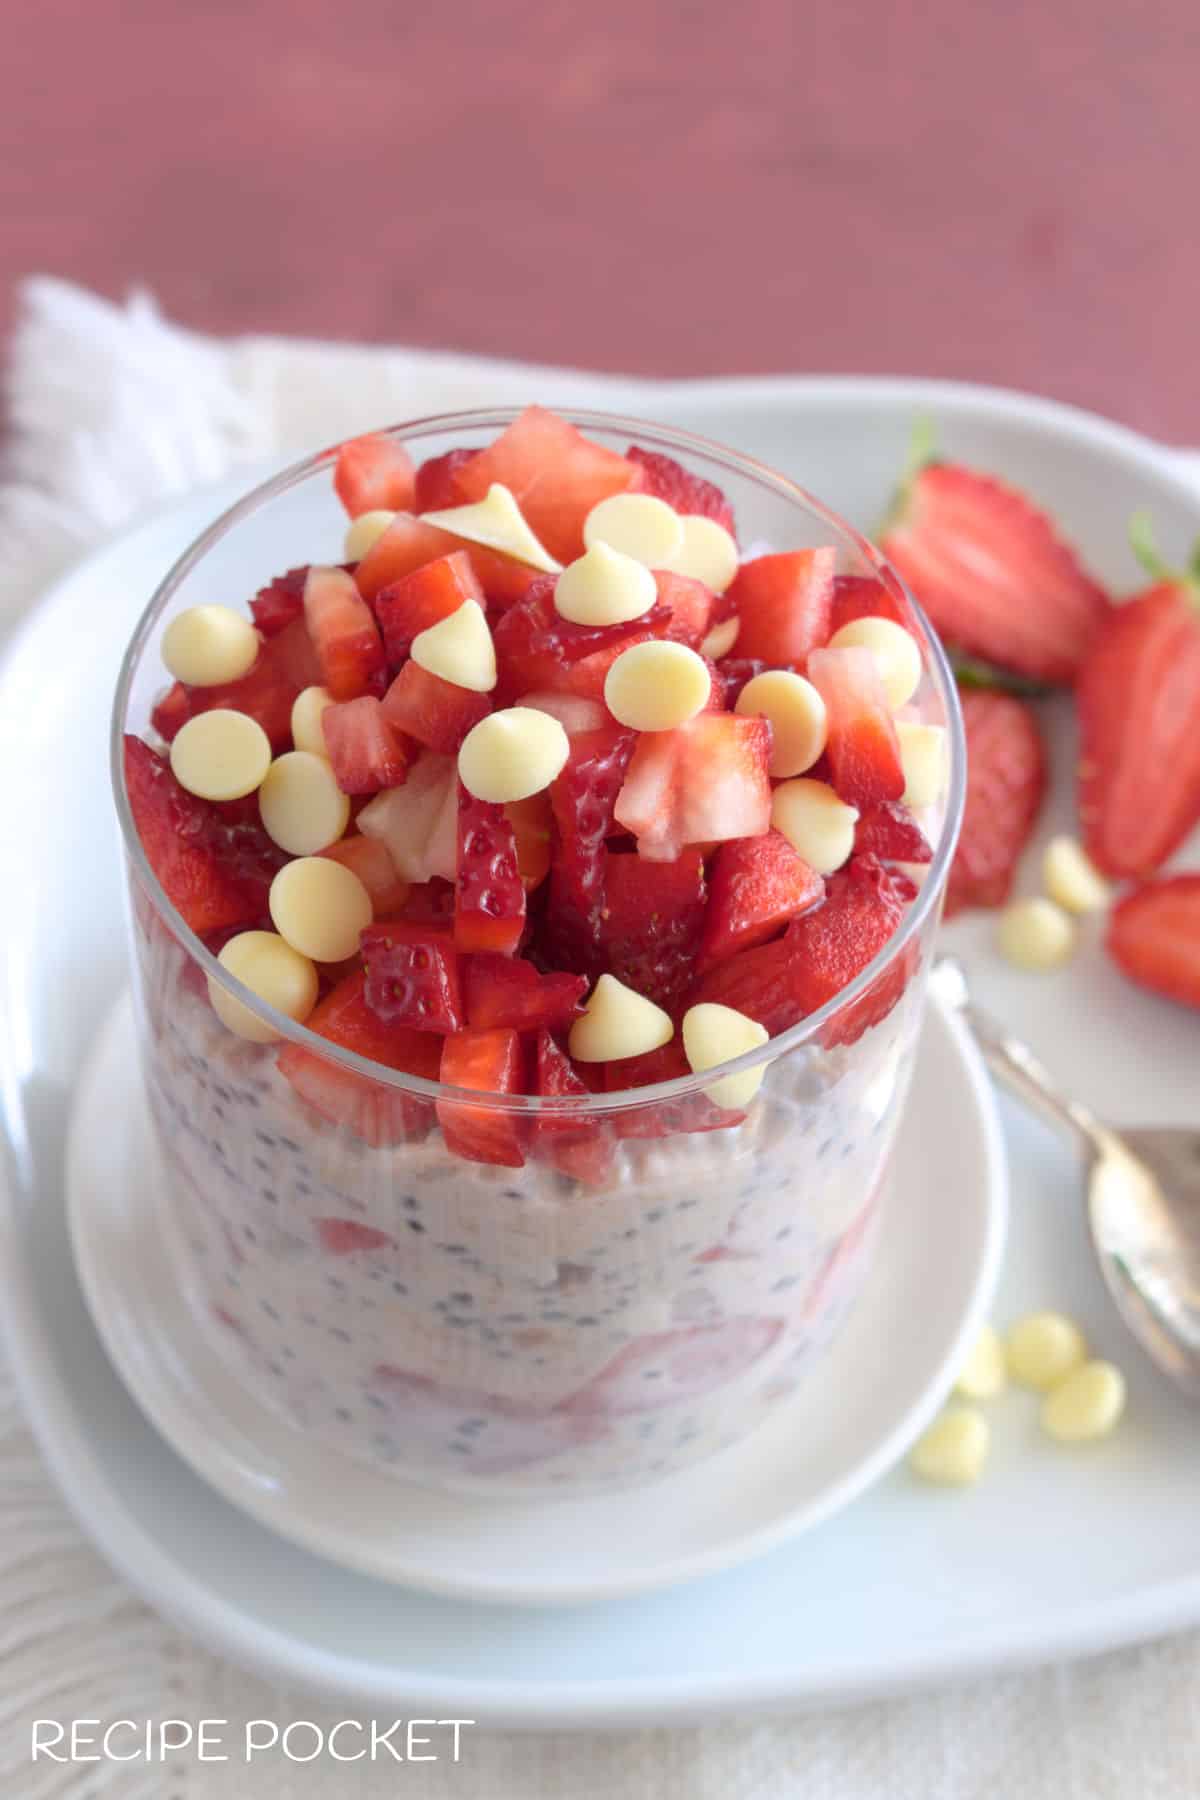 Image showing a diced strawberry and white chocolate chip topping on oats.